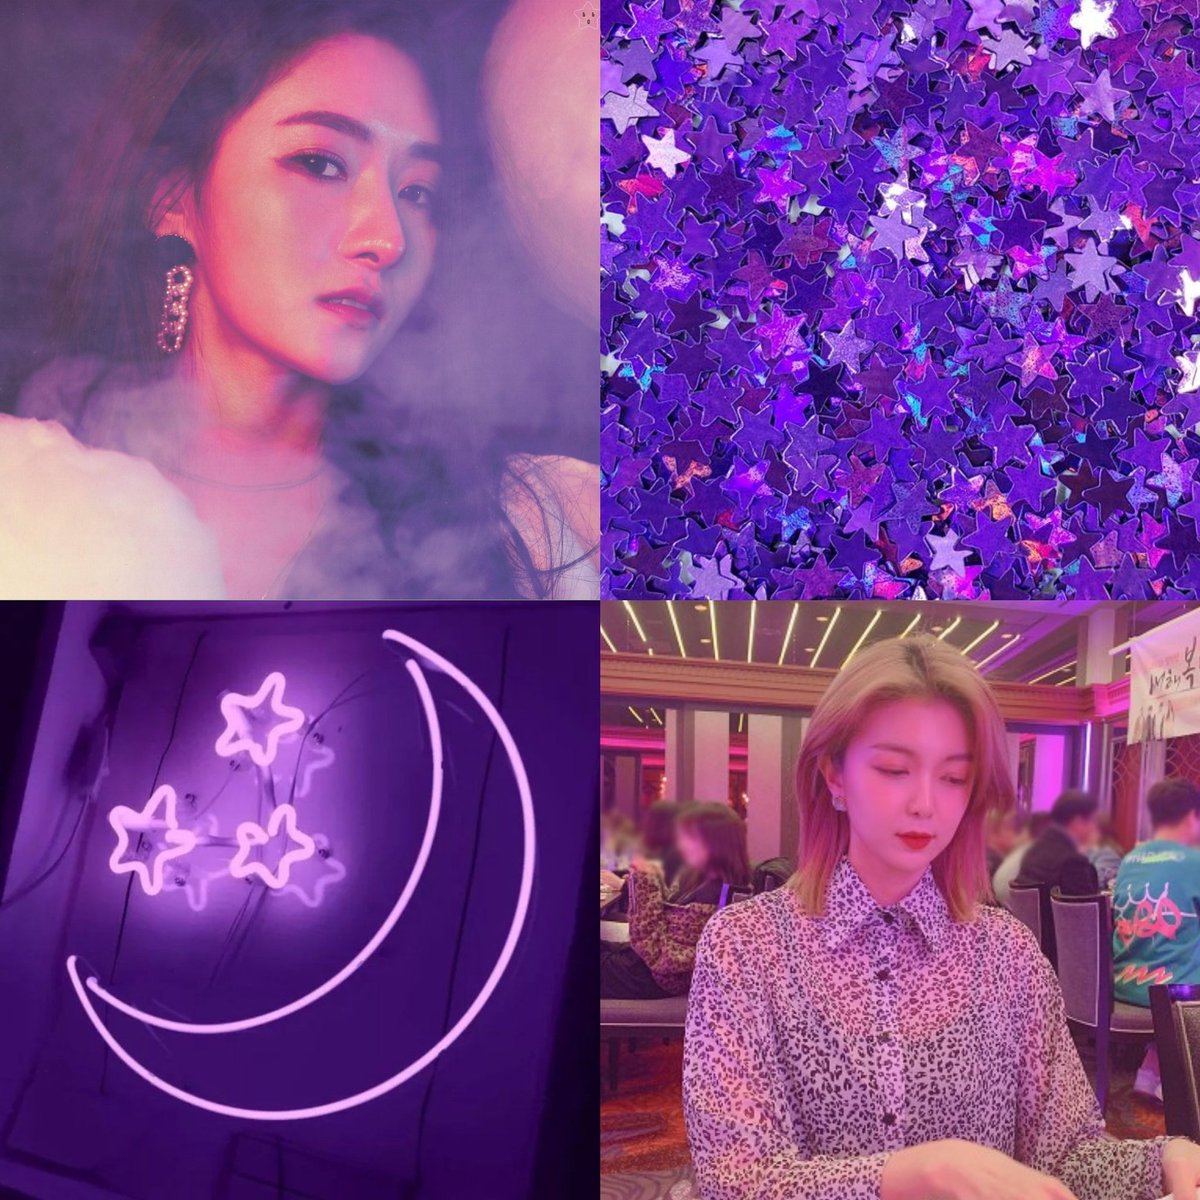 "broken heart, i try to fill it up with you"after a messy break-up, yubin meets a mysterious woman in a club. what starts out as a mere distraction slowly turns into something more. yet yubin has to realize that bora keeps one too many secrets...